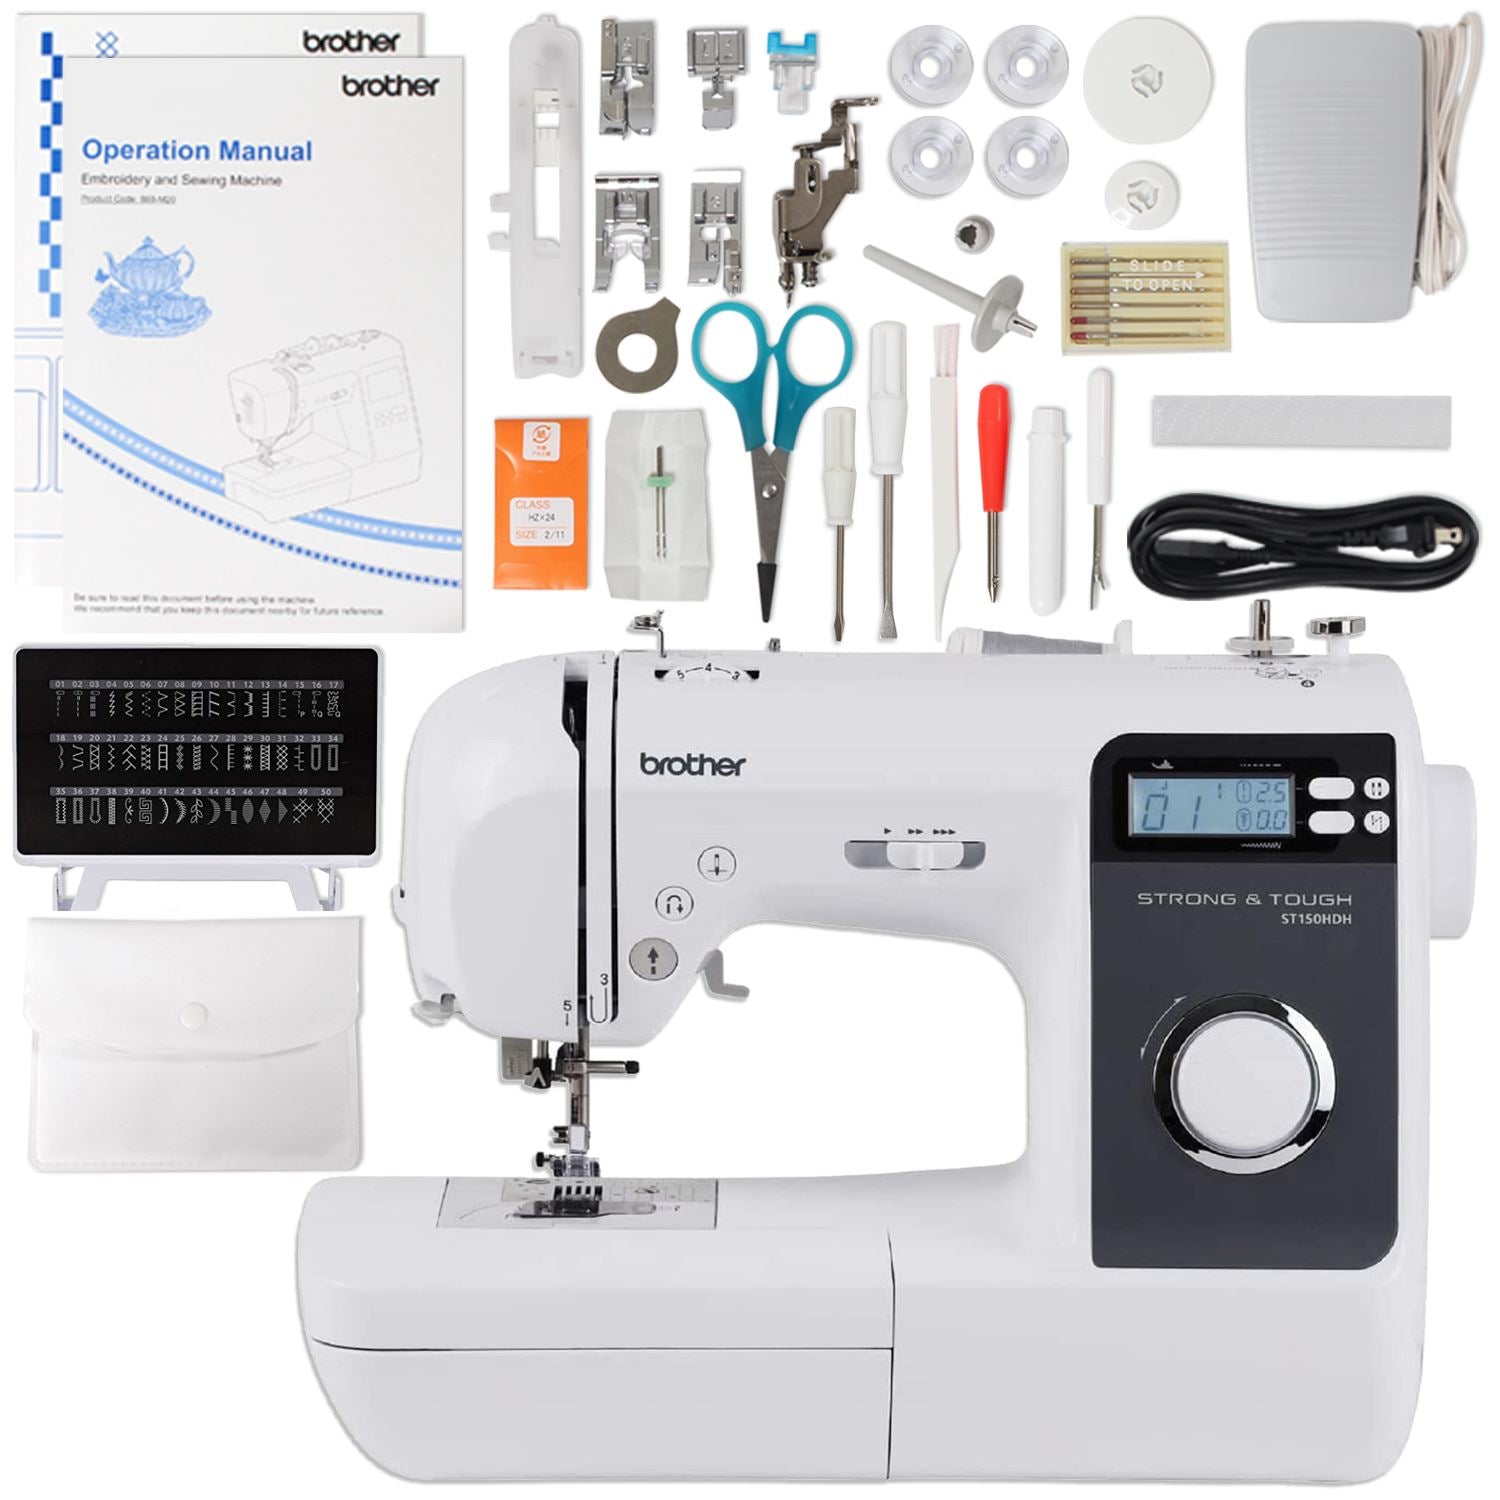 How To Attach the Foot Control and Power Cord on a Brother Sewing Machine 